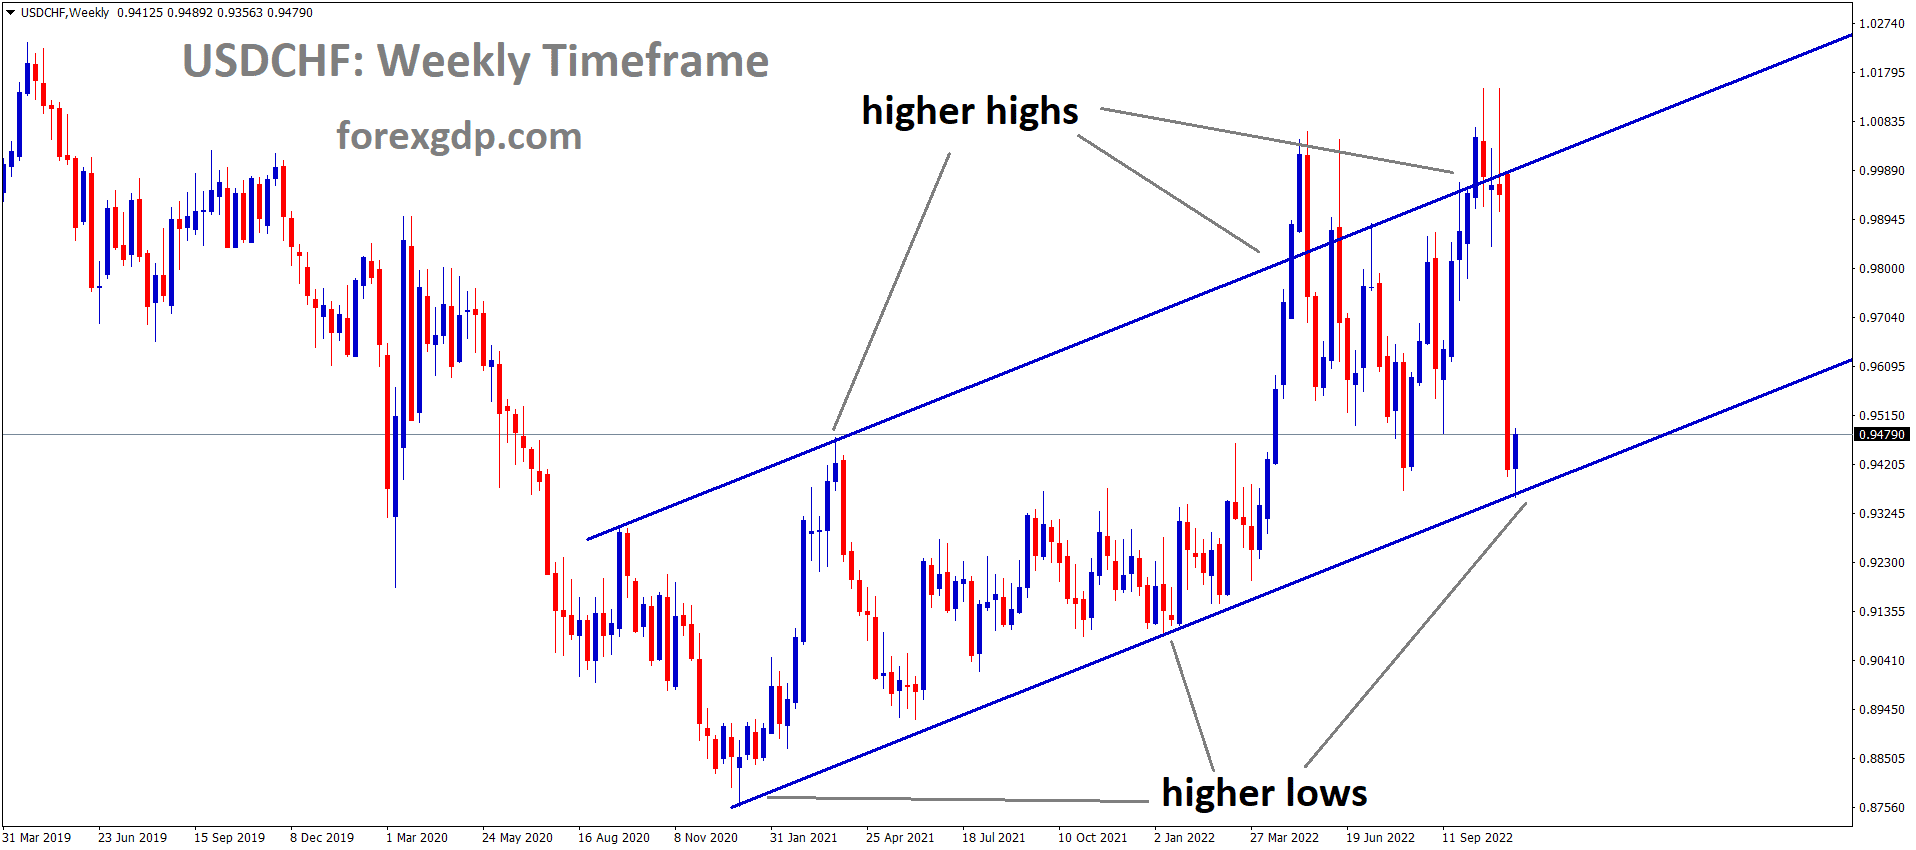 USDCHF is moving in an ascending channel and the market has reached the higher low area of the pattern